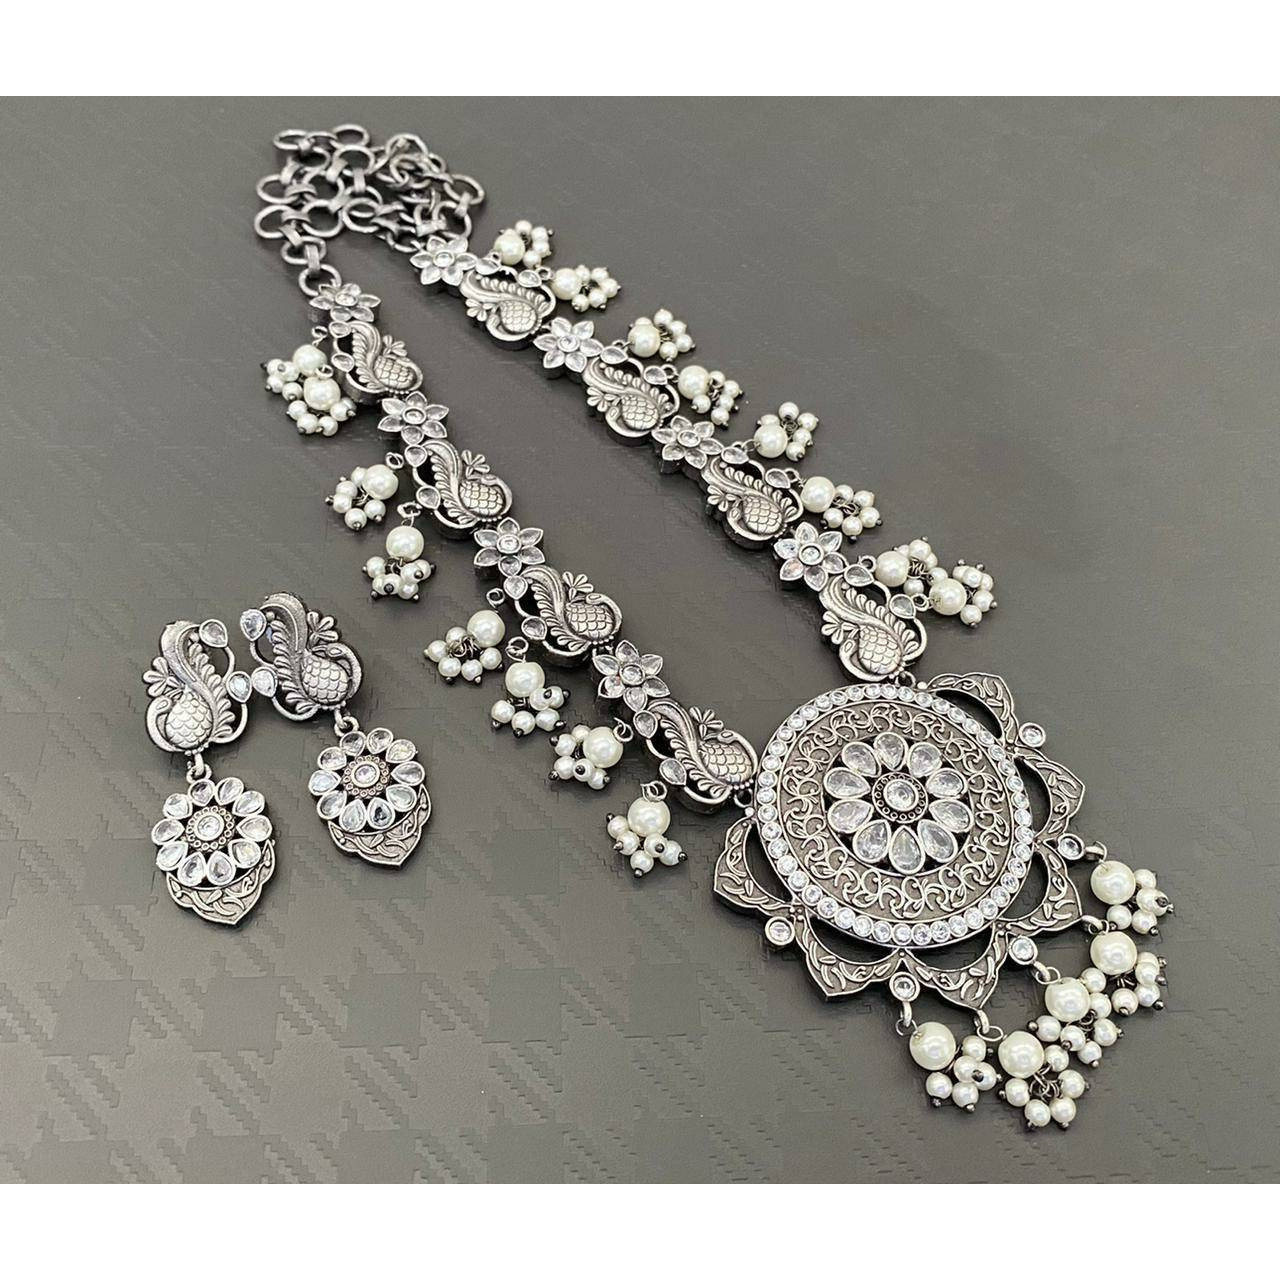 Adorn your beautiful personality with this exquisitely designed and handcrafted necklace in high quality German Silver. Pair it up with any casual,semi formal or formal attire for that traditional yet contemporary look.Premium quality